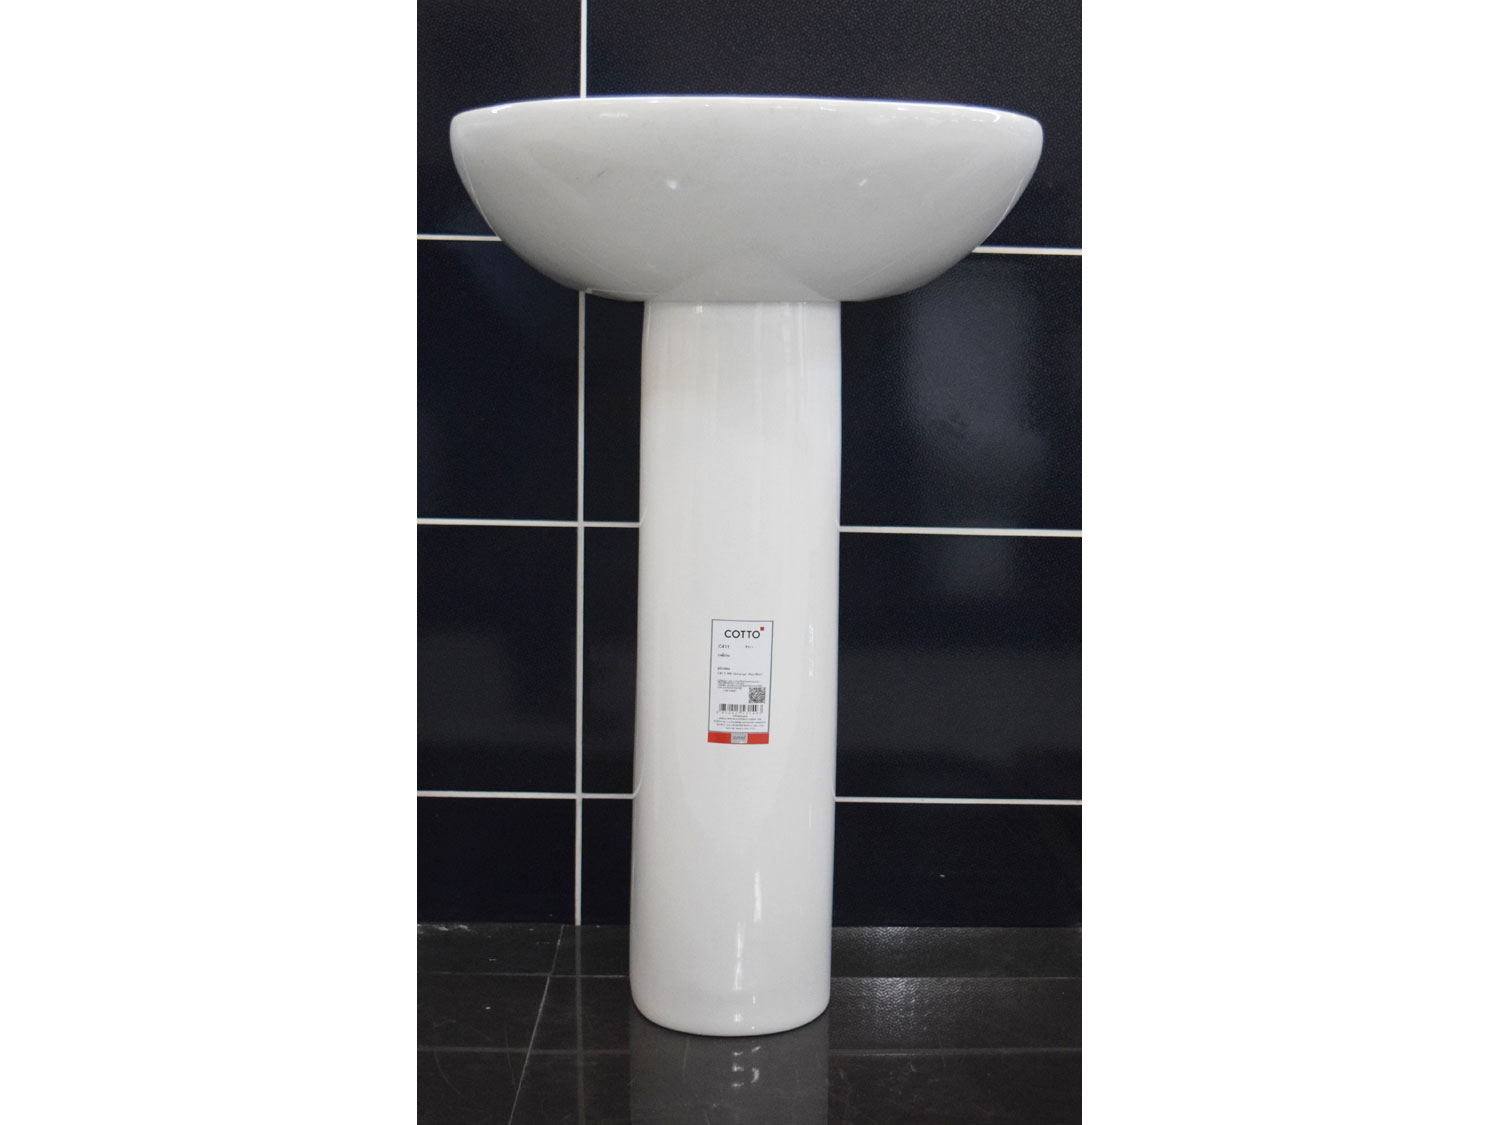 COTTO Wendy White Wall Mounted Basin